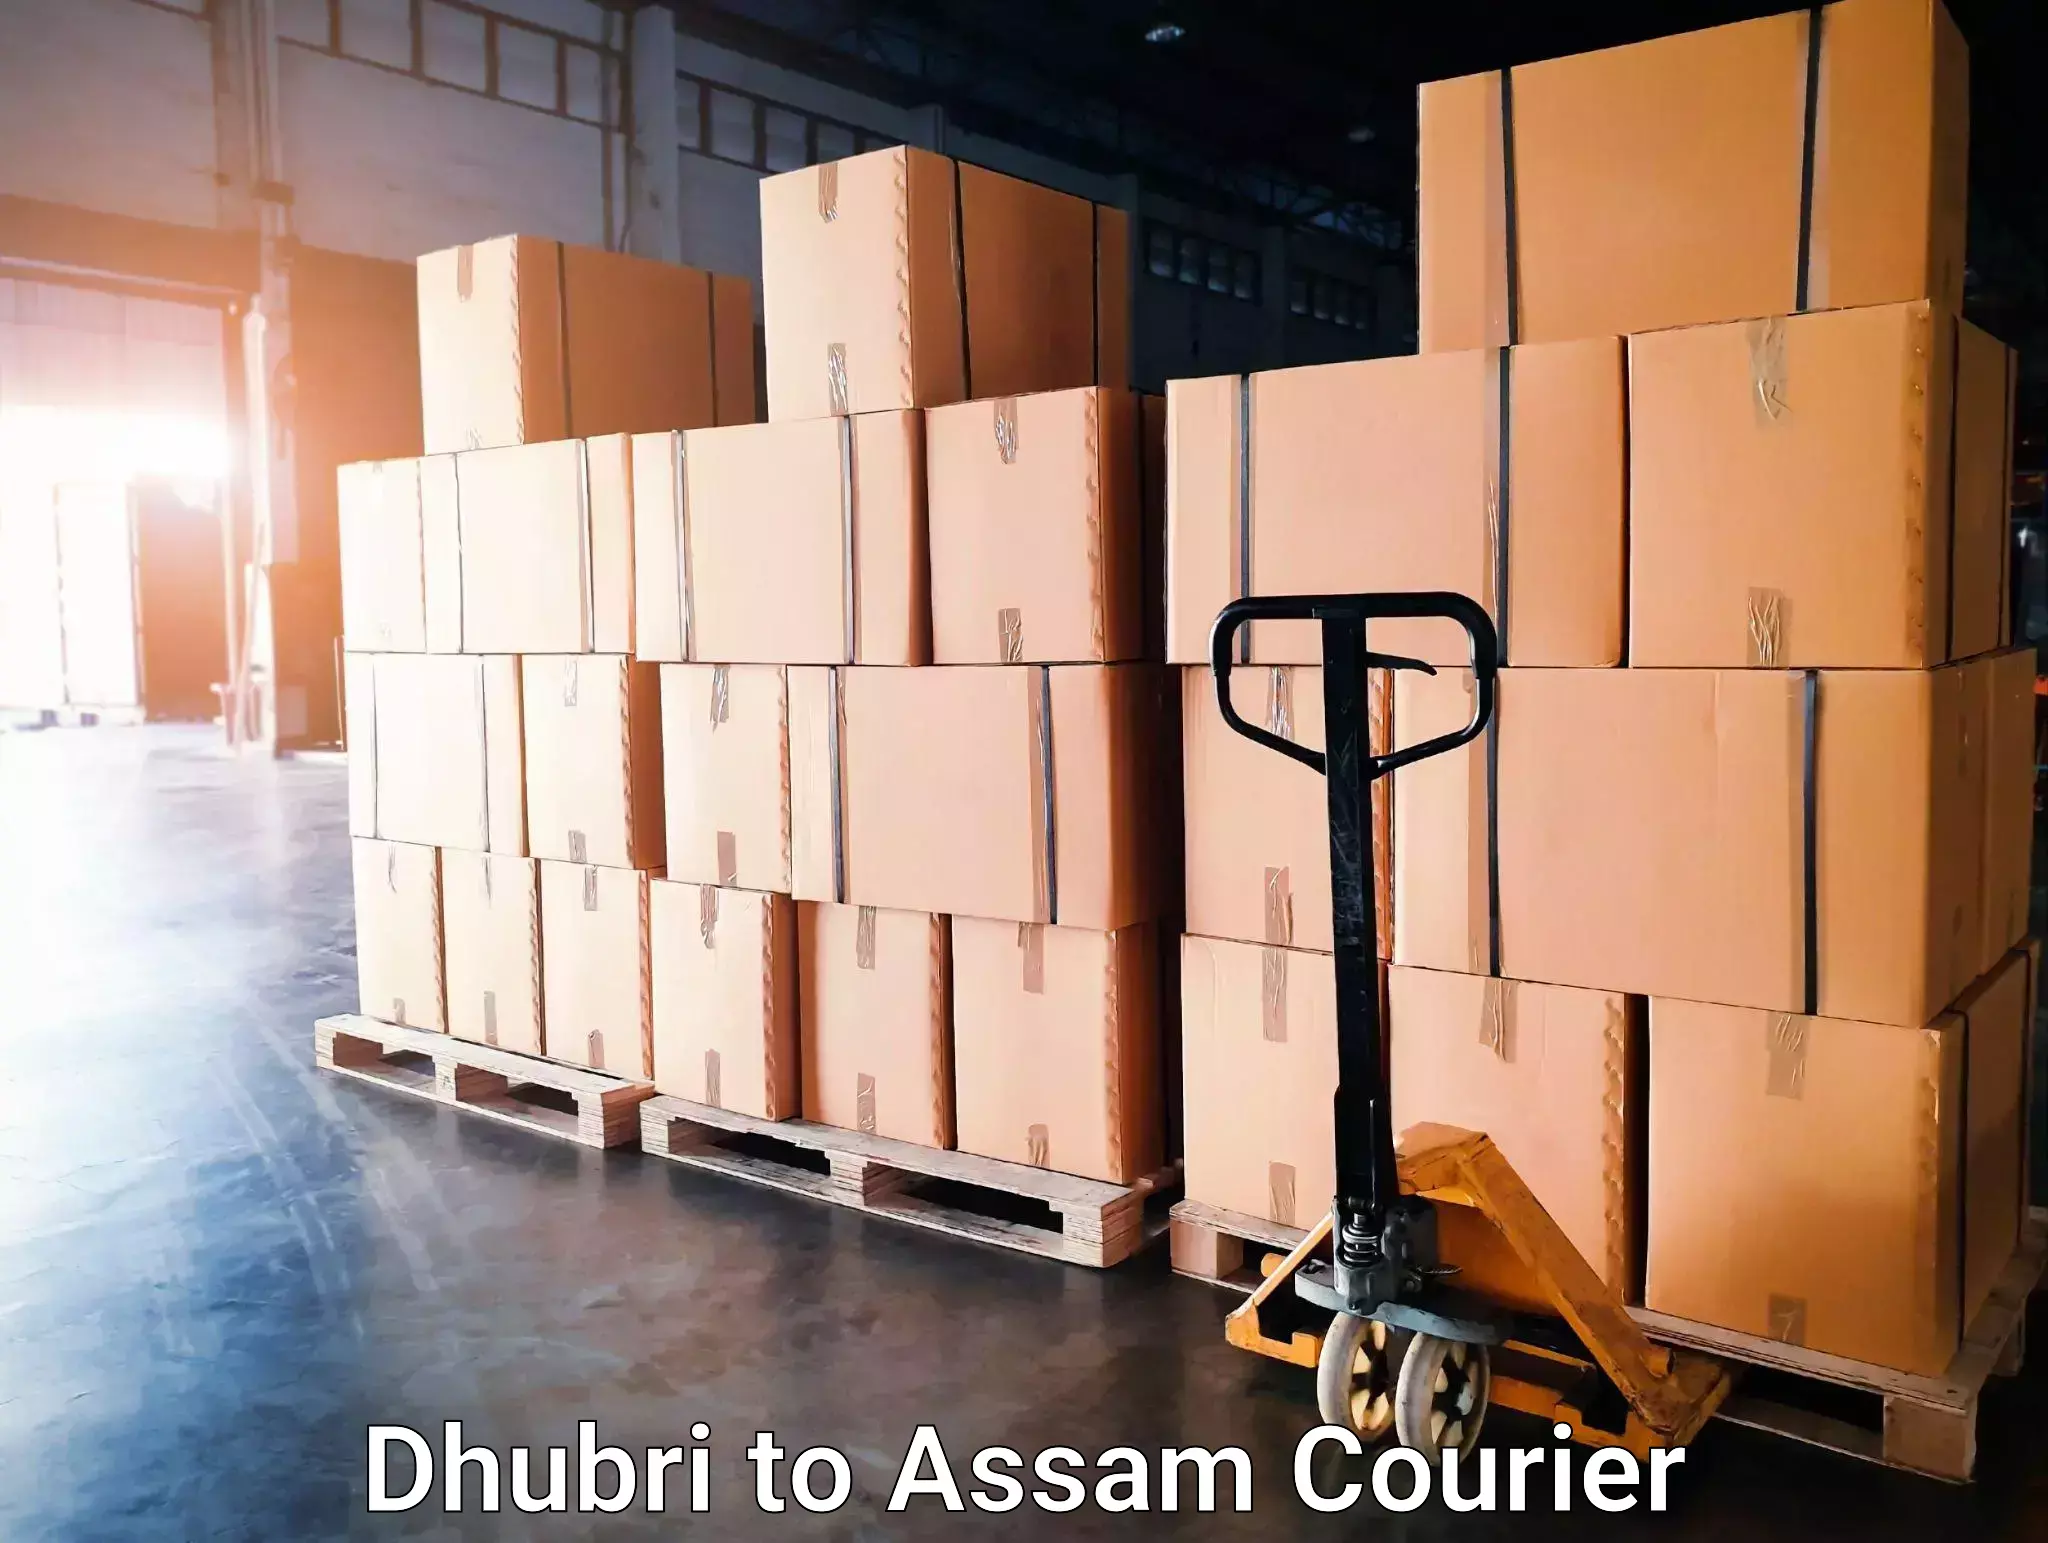 Sustainable courier practices Dhubri to Pathsala